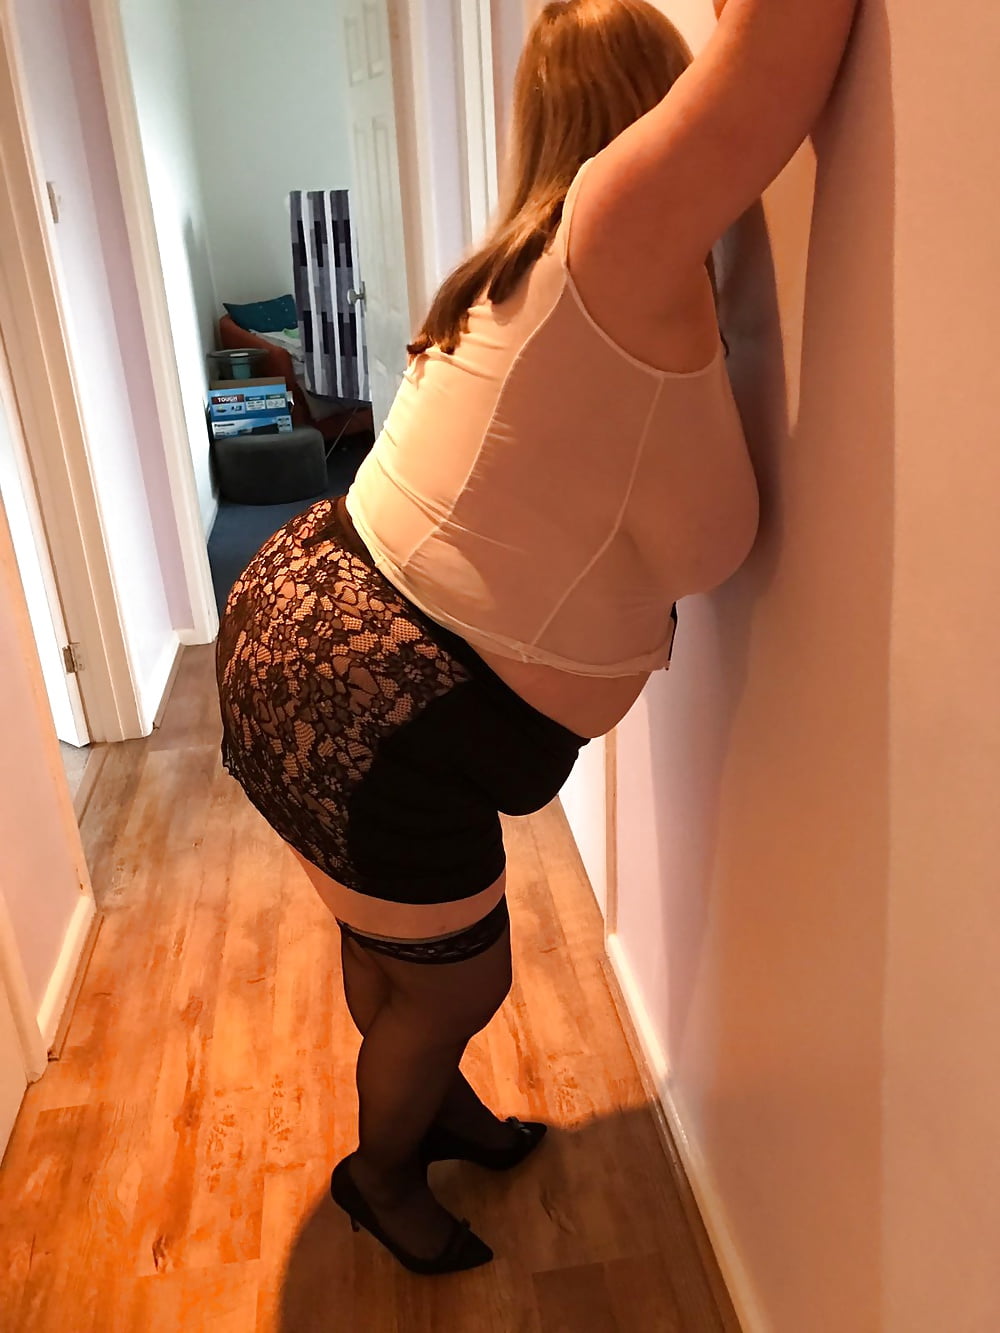 Sex Gallery My BBW wife posing for a fan 128629233 picture